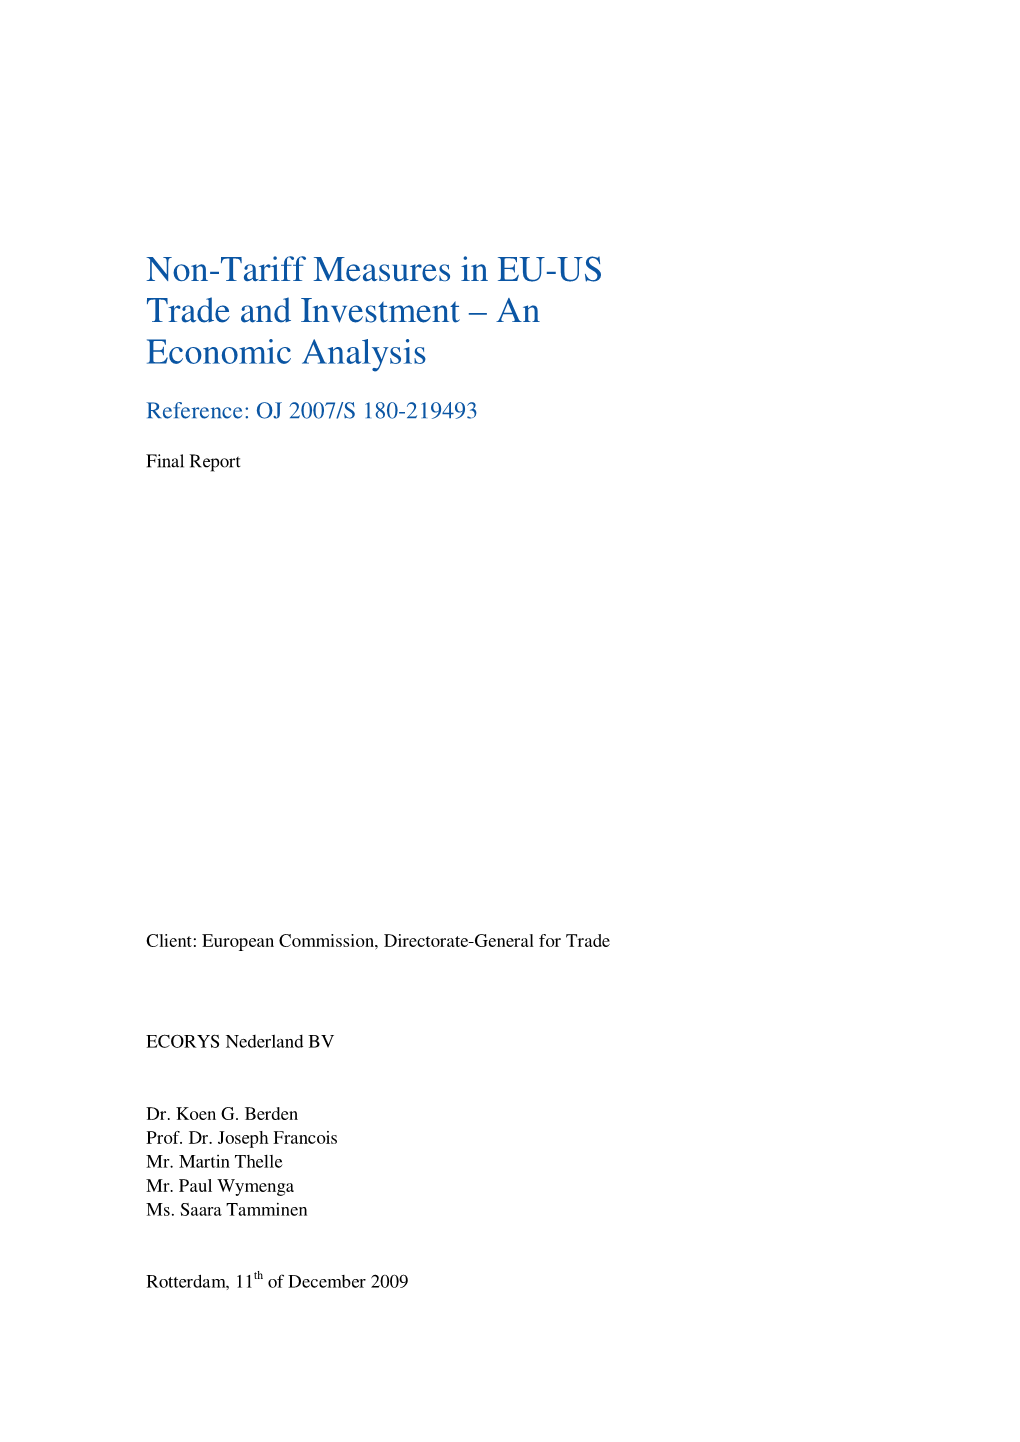 Non-Tariff Measures in EU-US Trade and Investment – an Economic Analysis